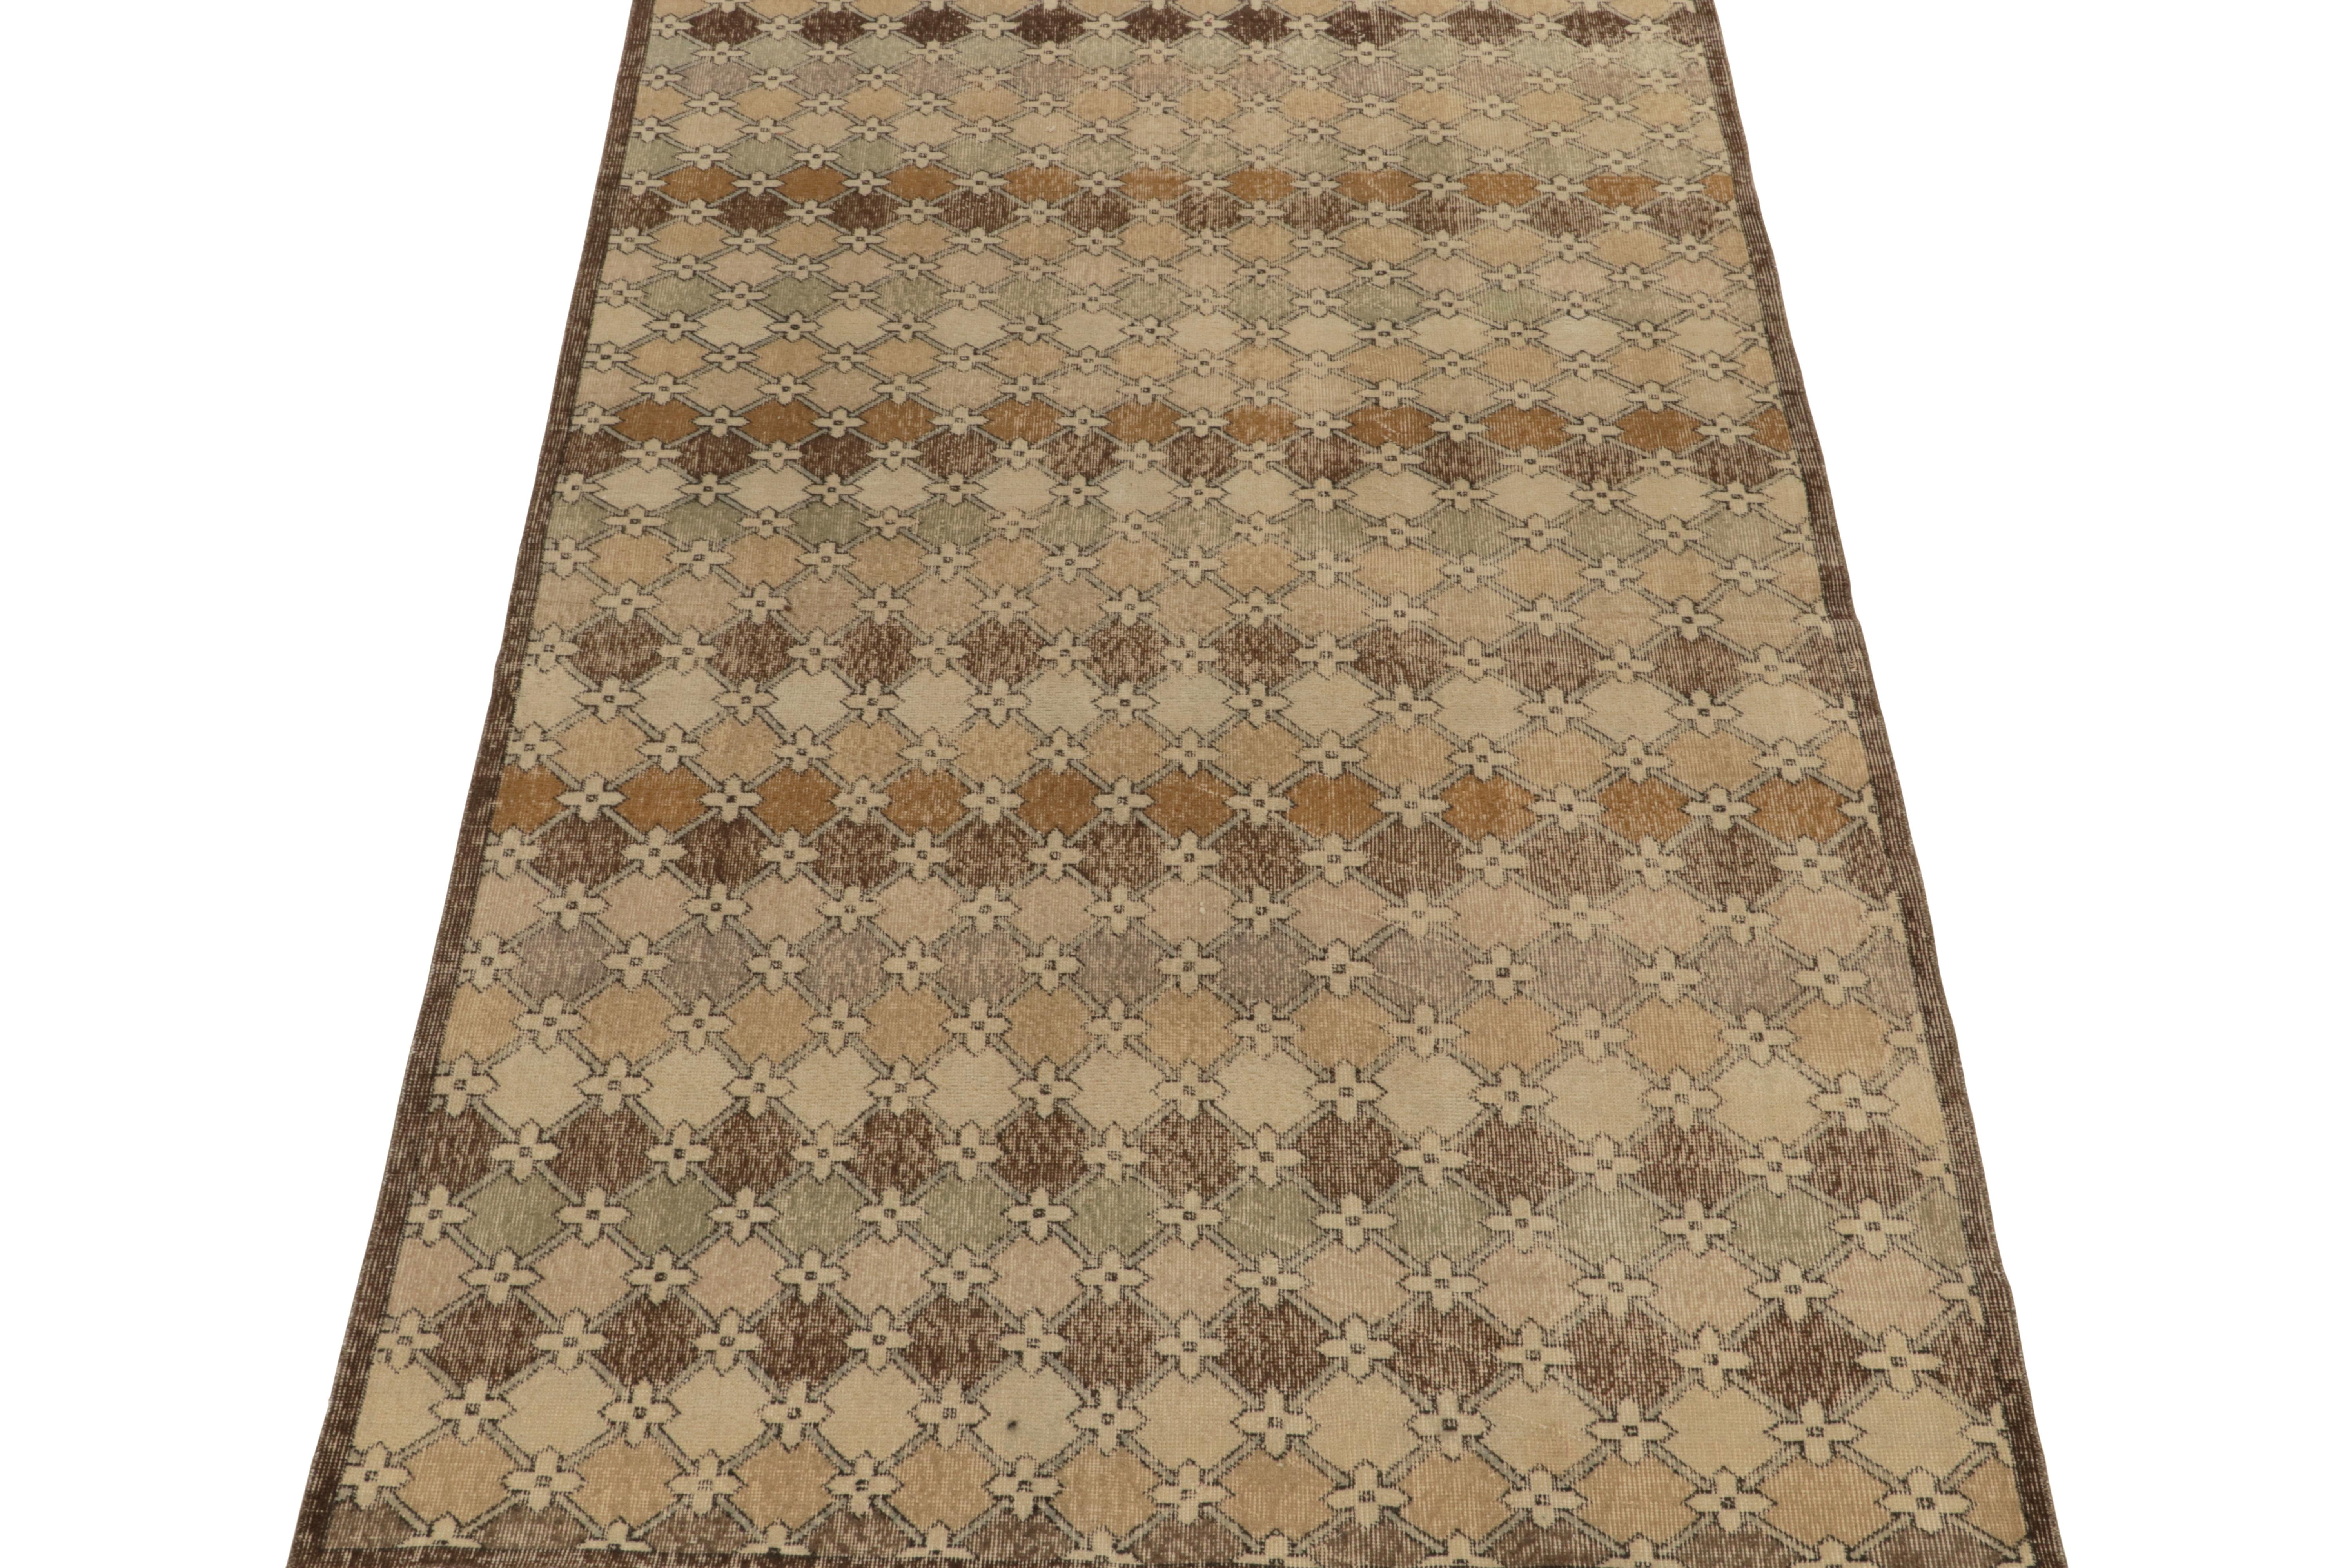 A 6x9 vintage rug exemplifying rare Turkish art deco sensibilities, among the latest to join our Mid Century Pasha Collection. 

Curated from an innovative Turkish designer, this 1960s piece features a smart geometric pattern in earthy beige,